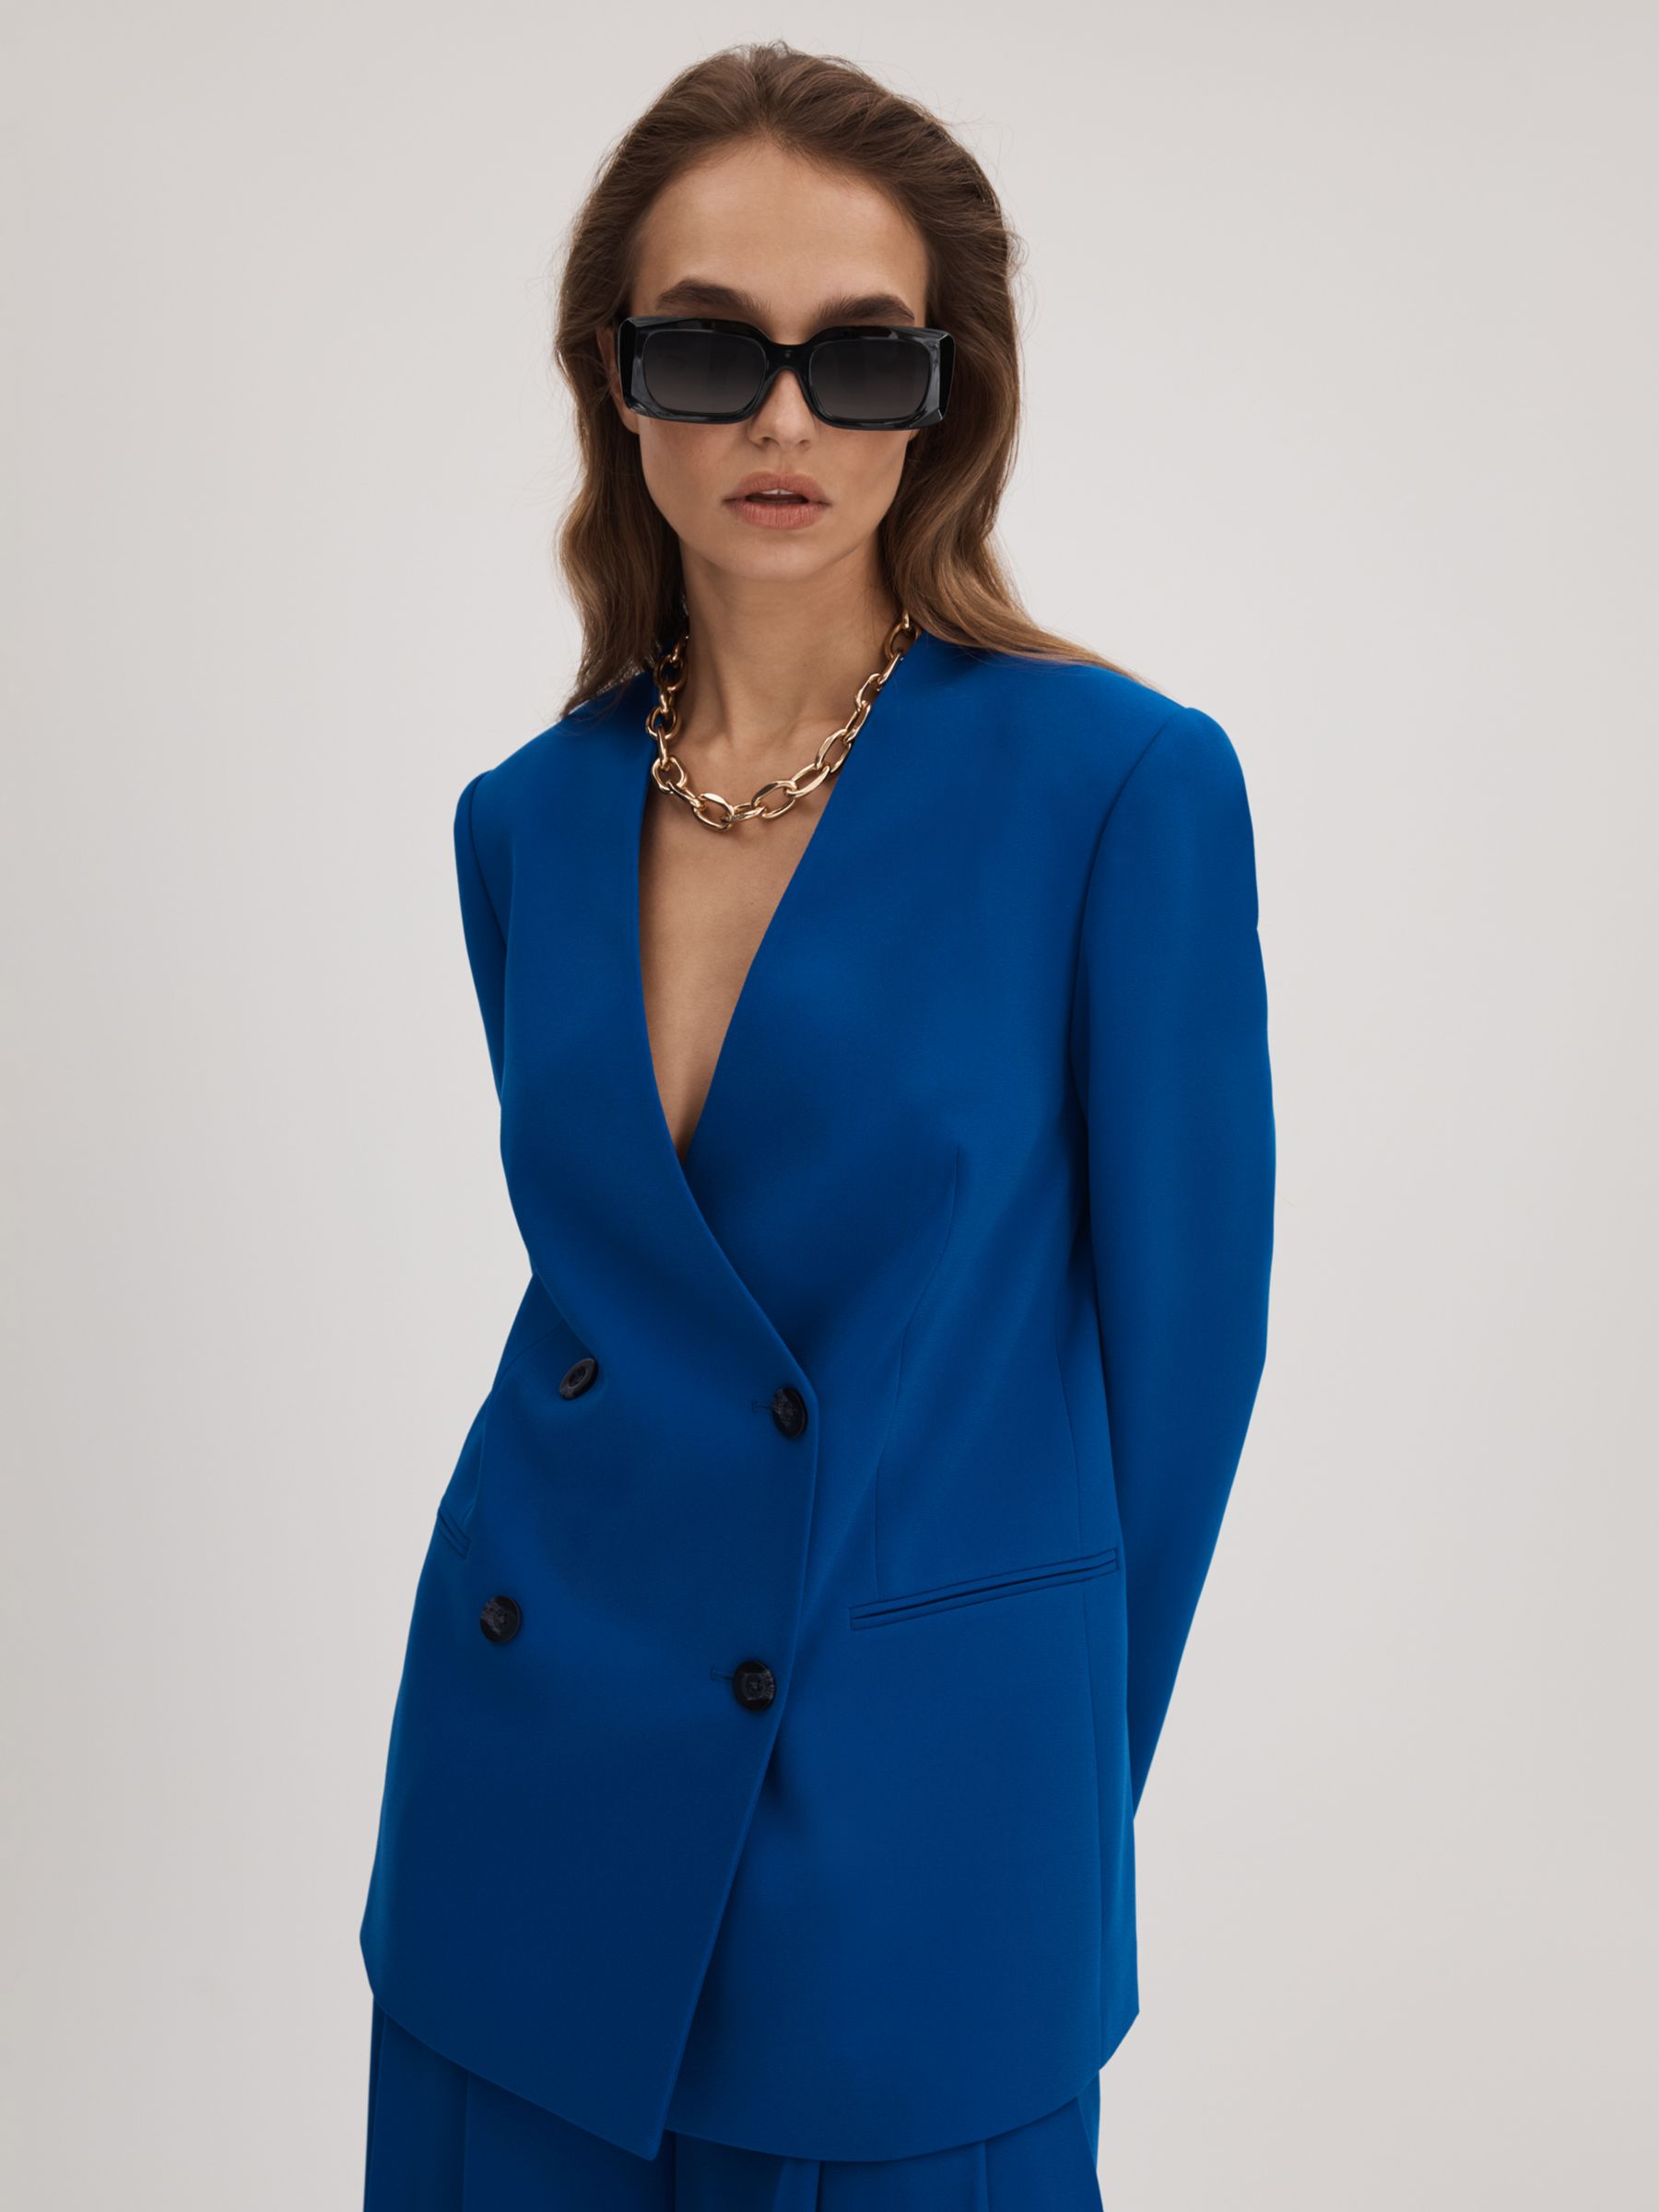 FLORERE Collarless Double Breasted Blazer, Bright Blue, 8